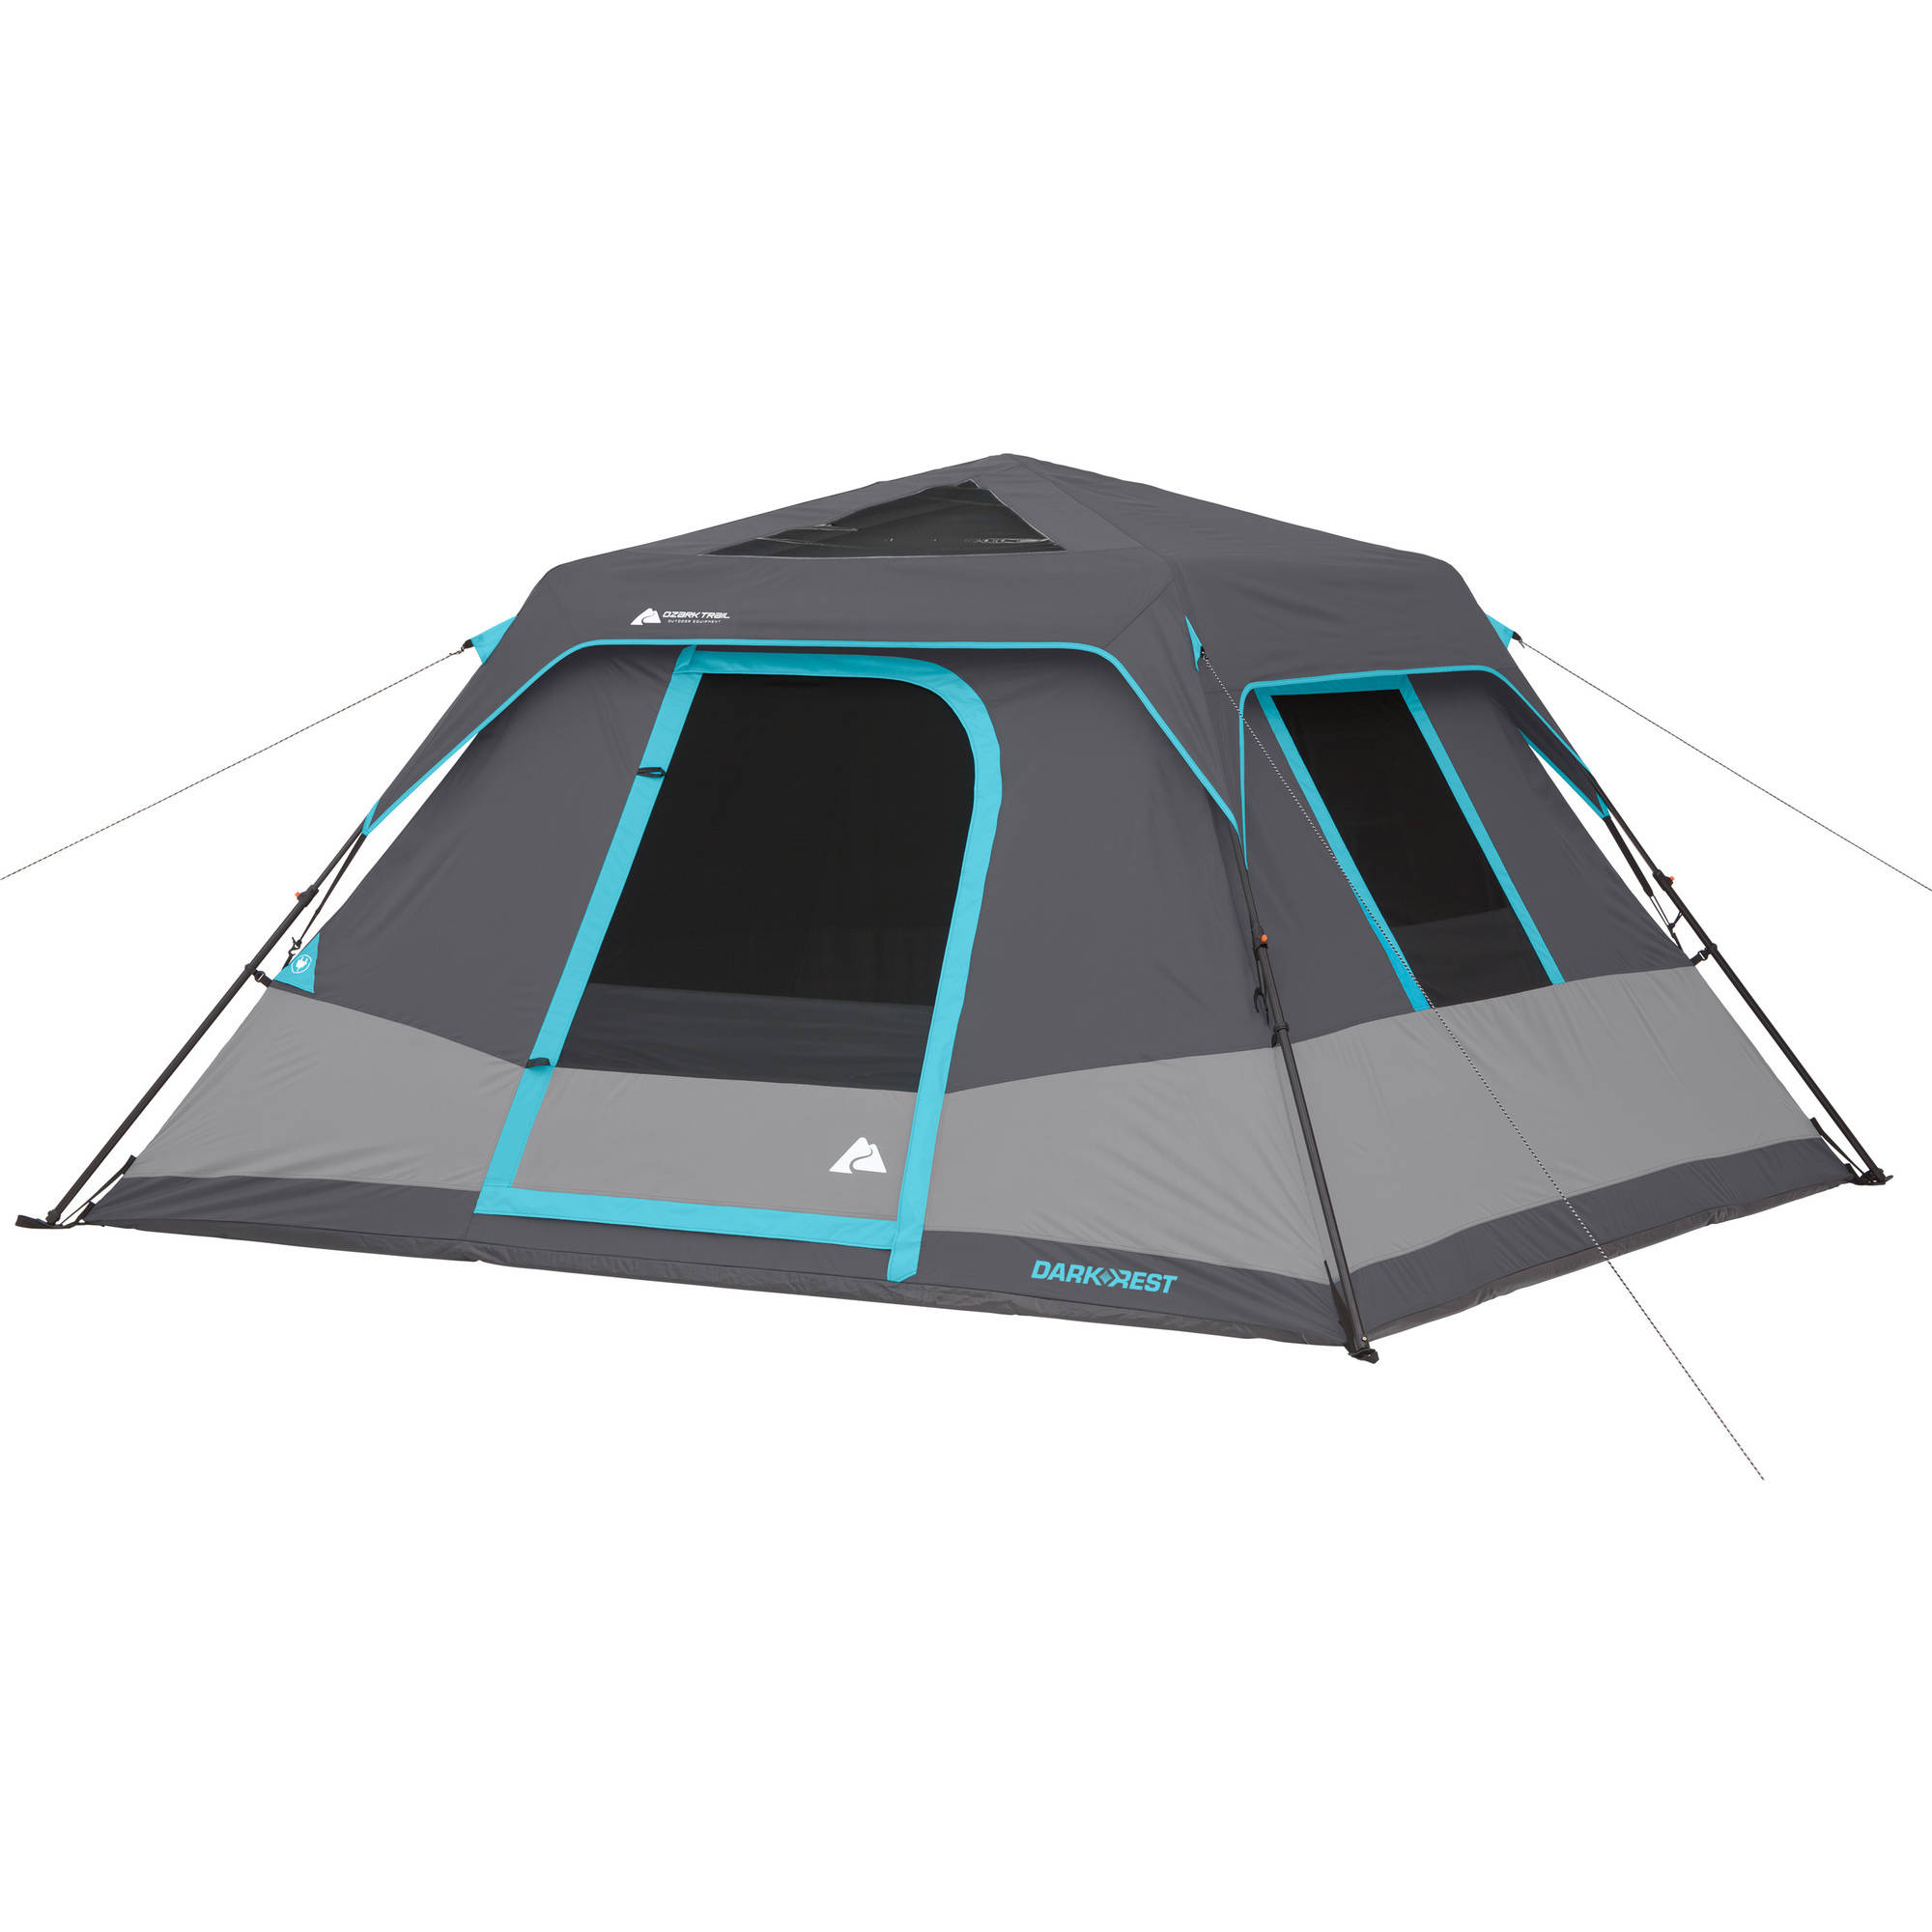 Ozark Trail 10 X 9 6-Person Dark Rest Instant Cabin Tent, 16.81lbs - image 1 of 12